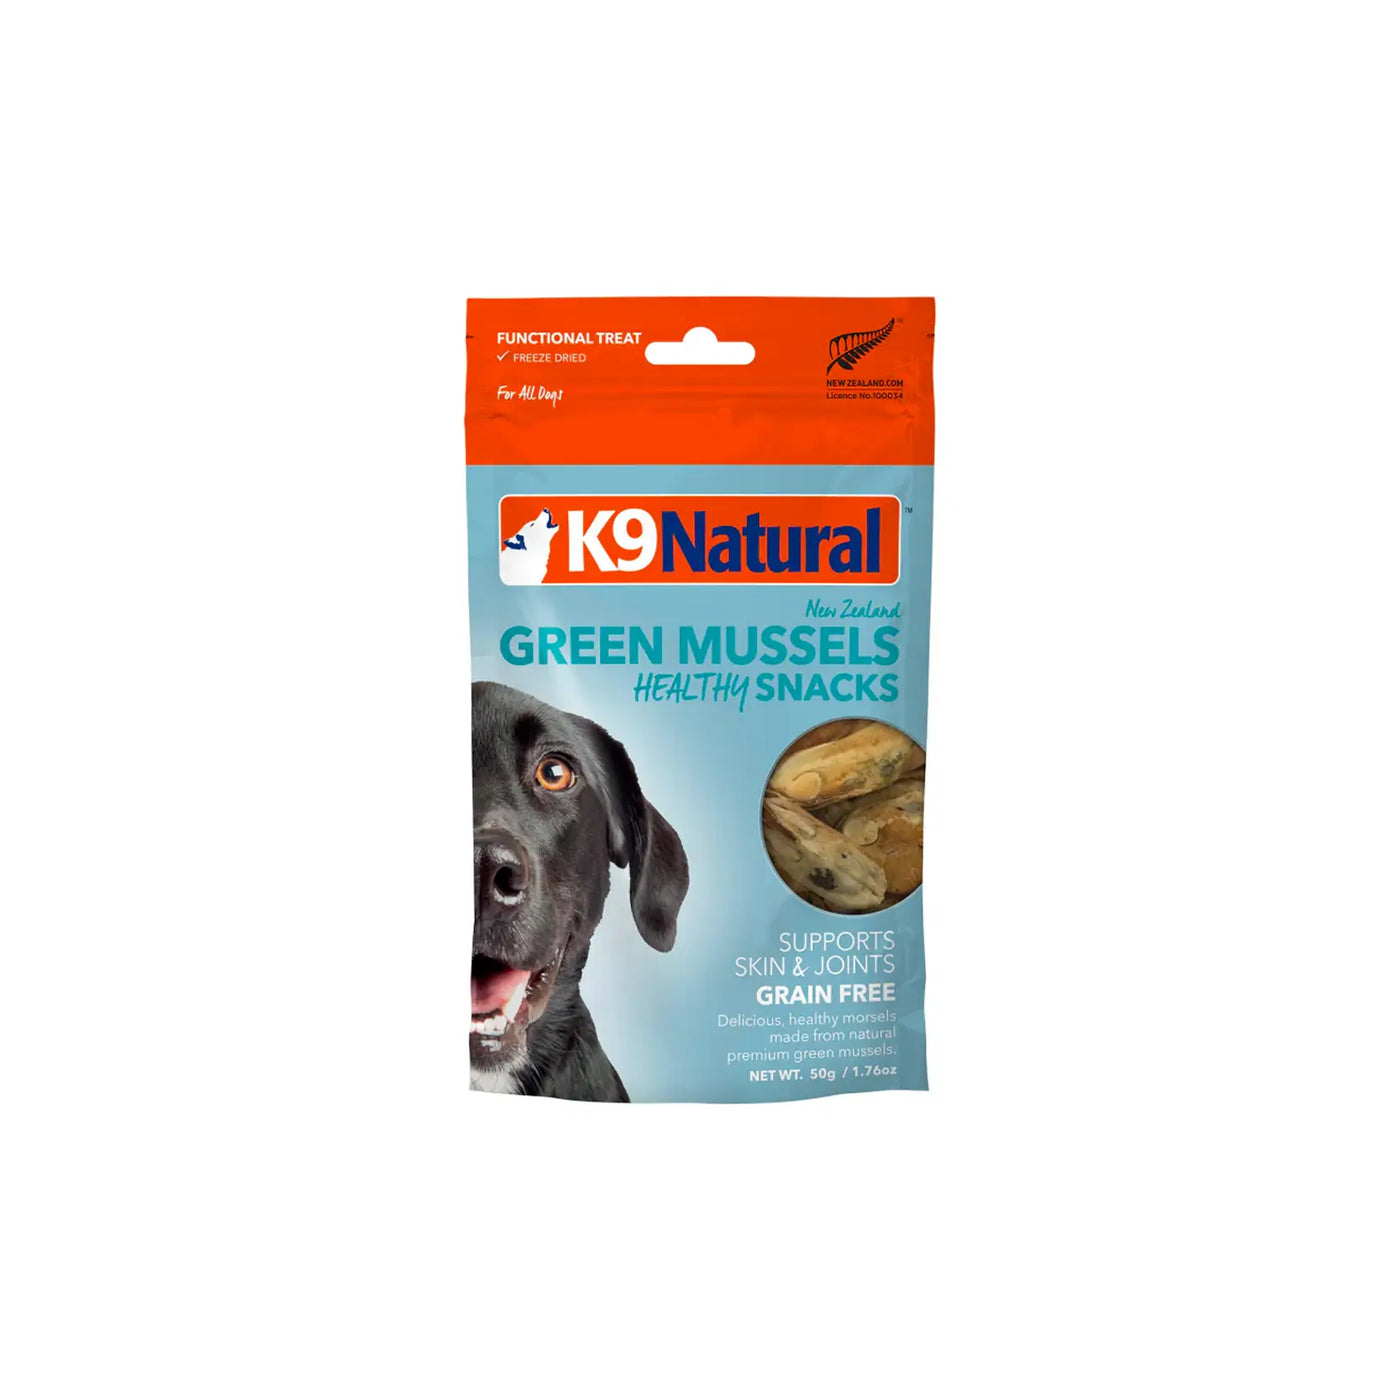 K9 Natural Freeze Dried Dog Treats - Healthy Snacks - Green Mussels 50g